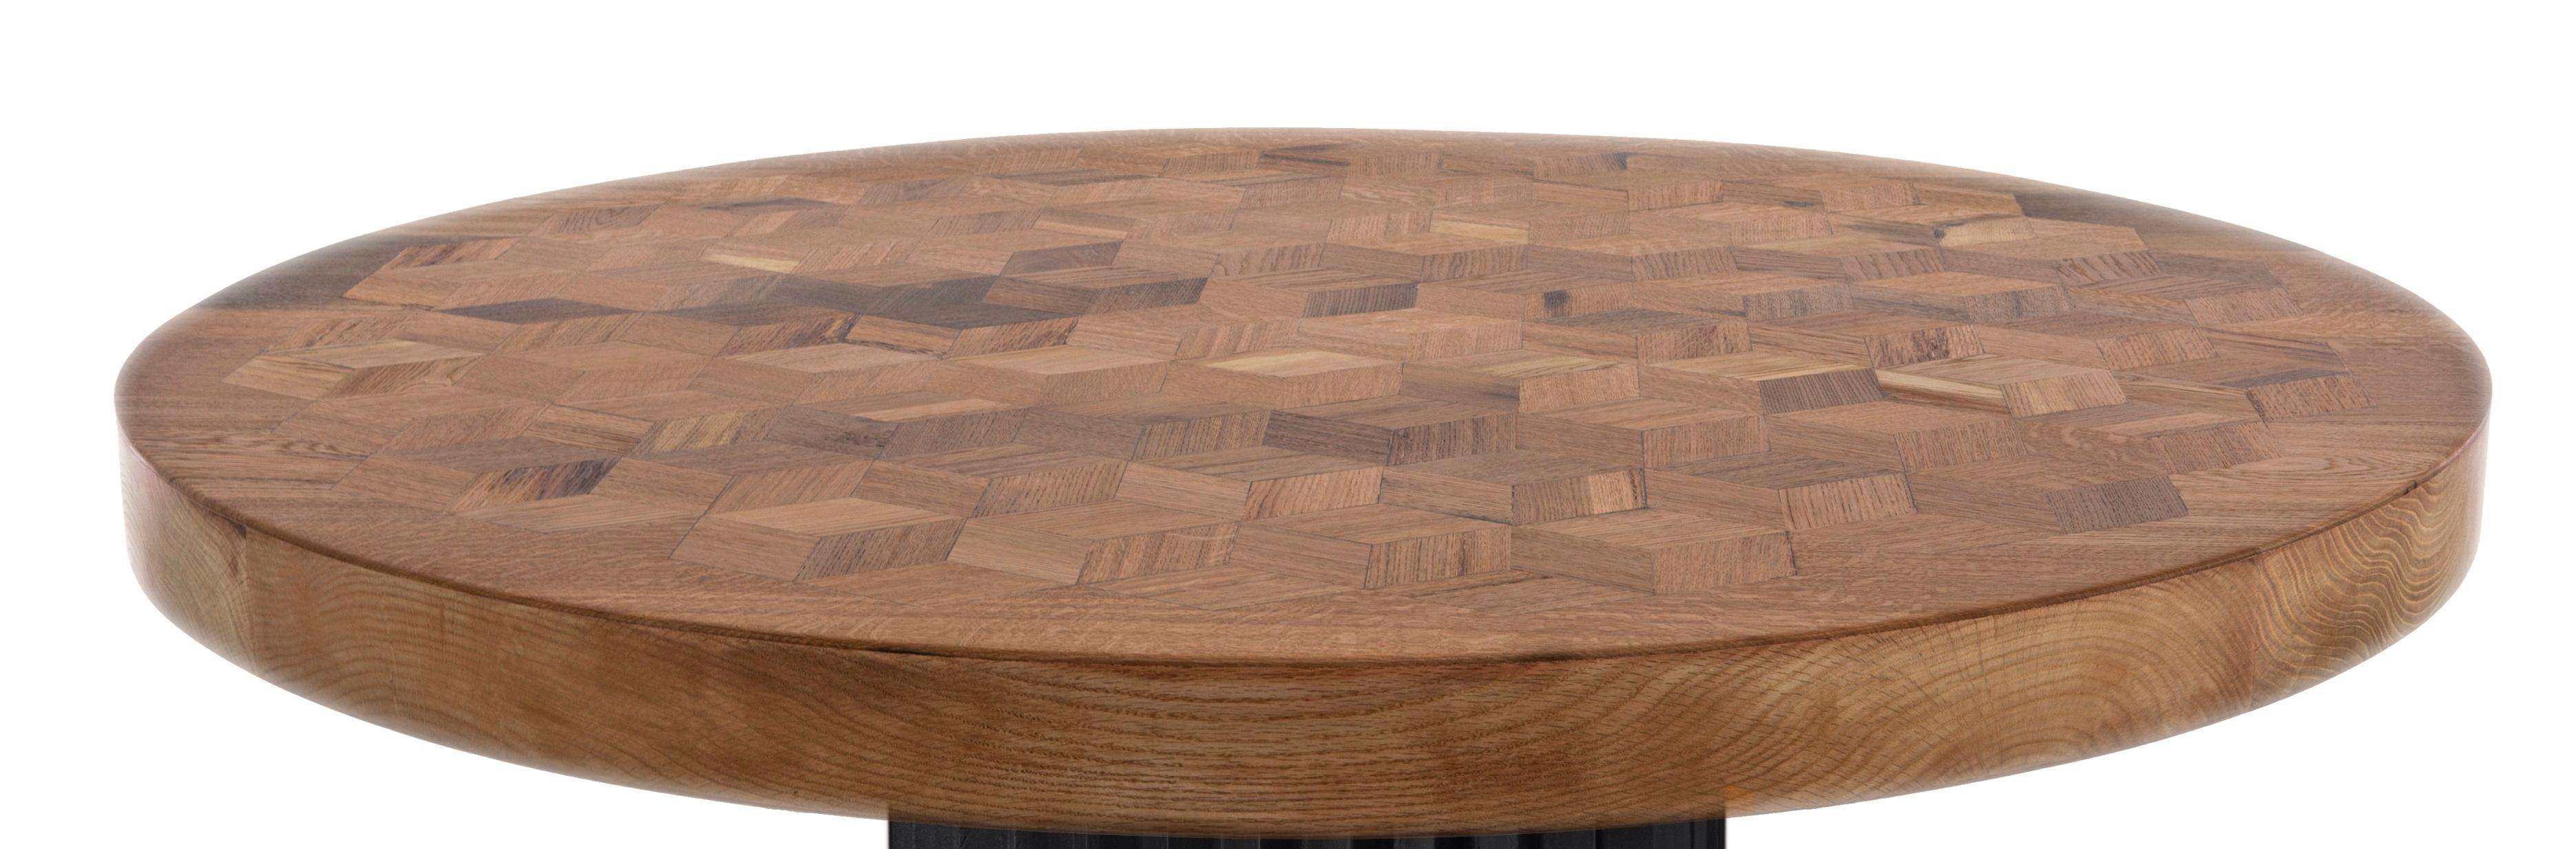 Italian Doris Reclaimed Oak Round Dining Table by Fred and Juul For Sale